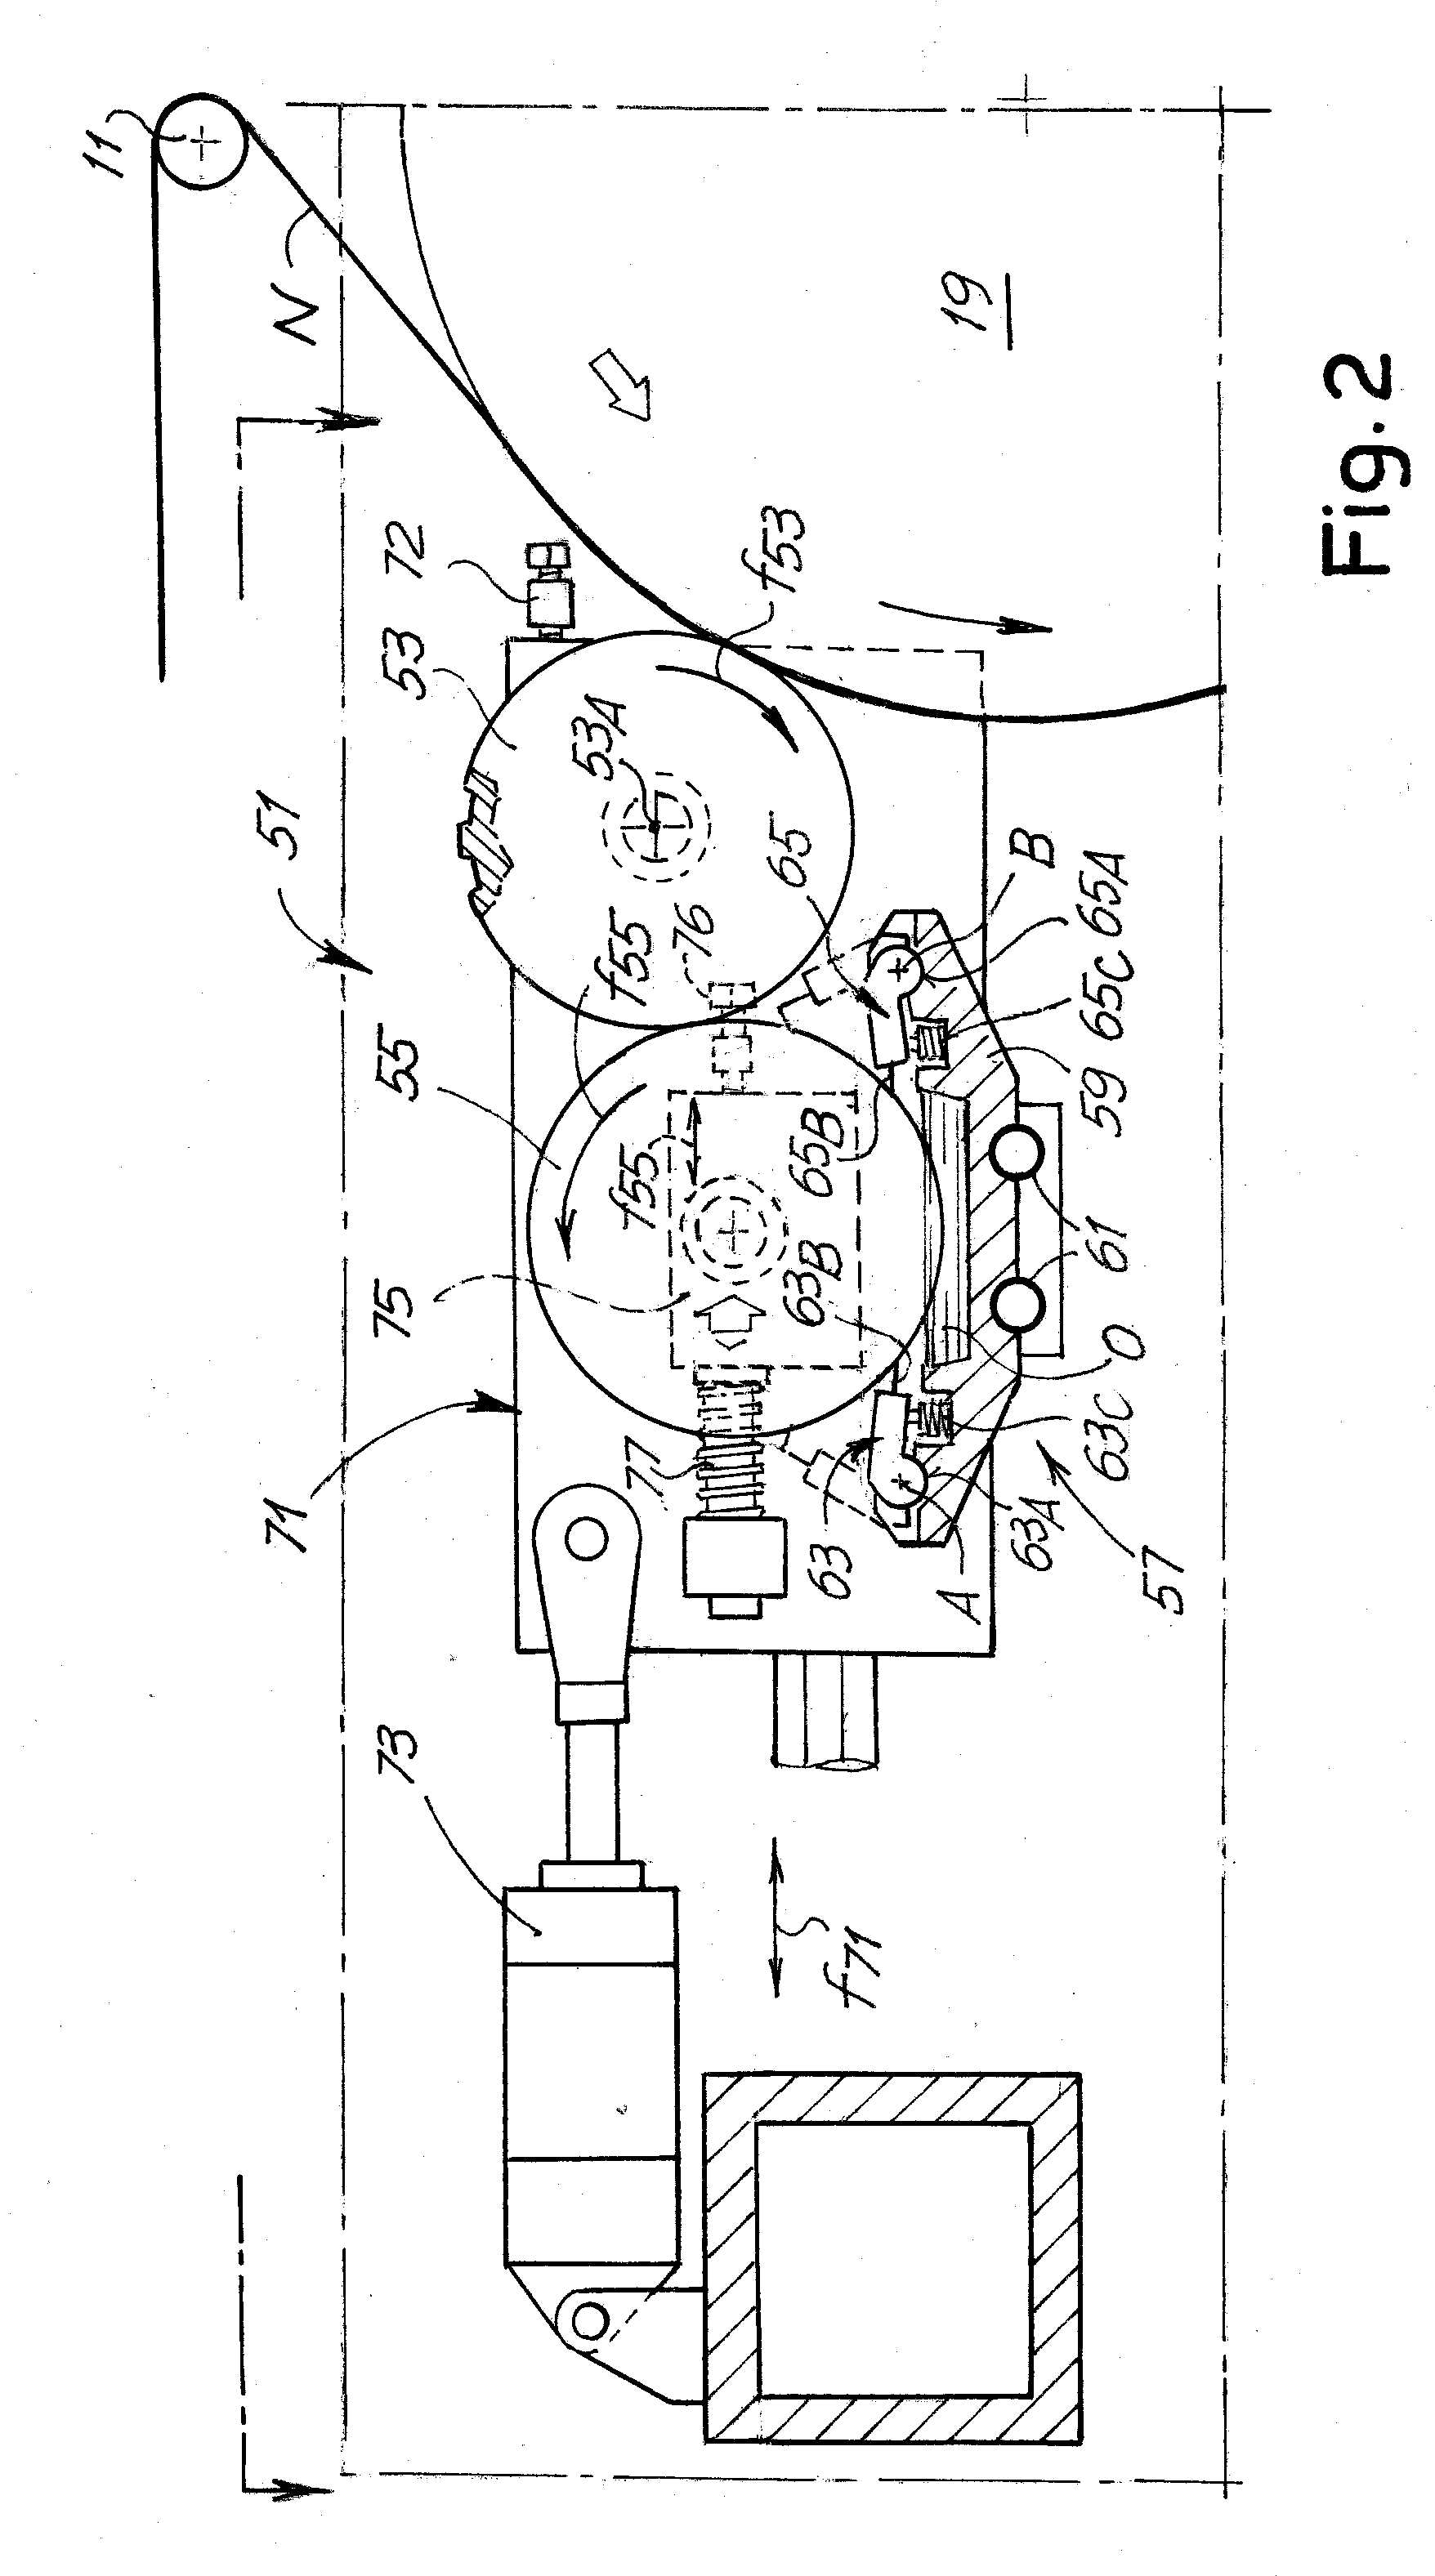 Vacuum metallization device with means to create metal-free areas